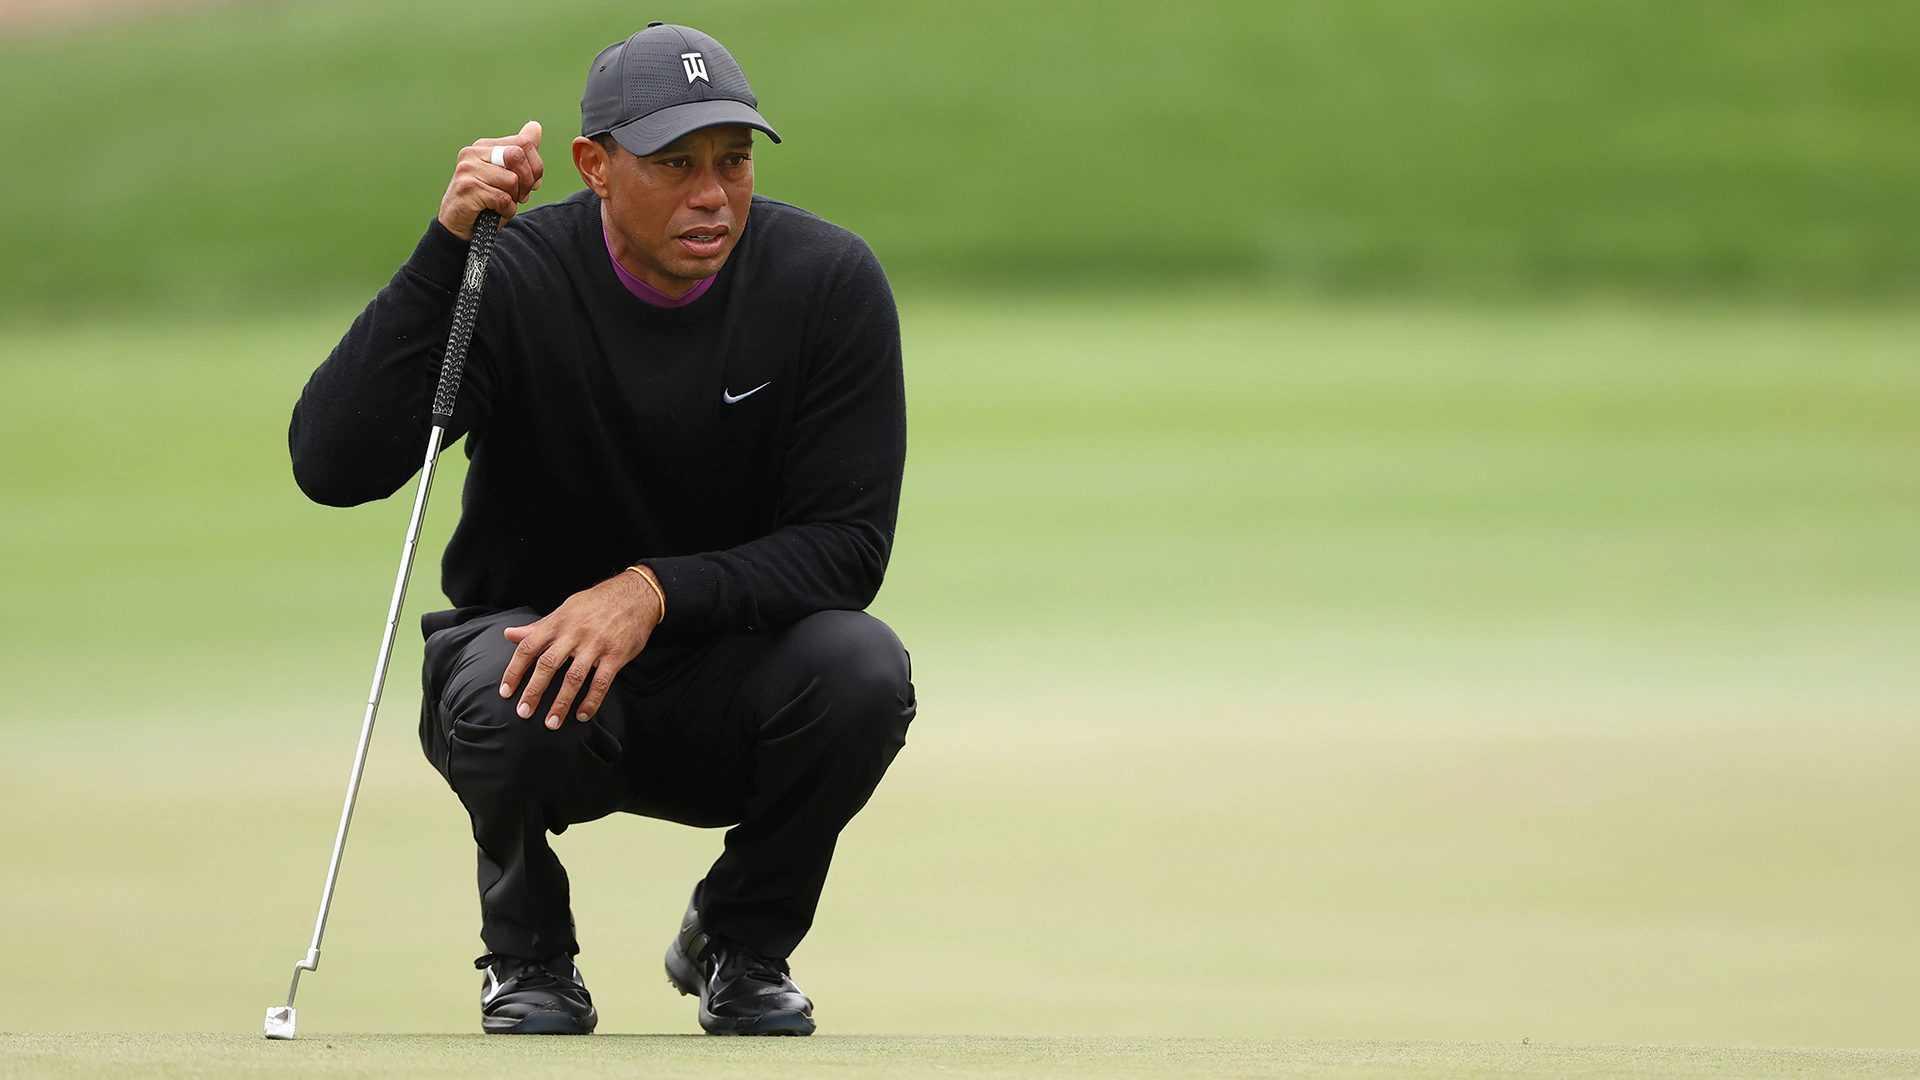 Even after 66, Tiger Woods still not ruling out adding Houston Open